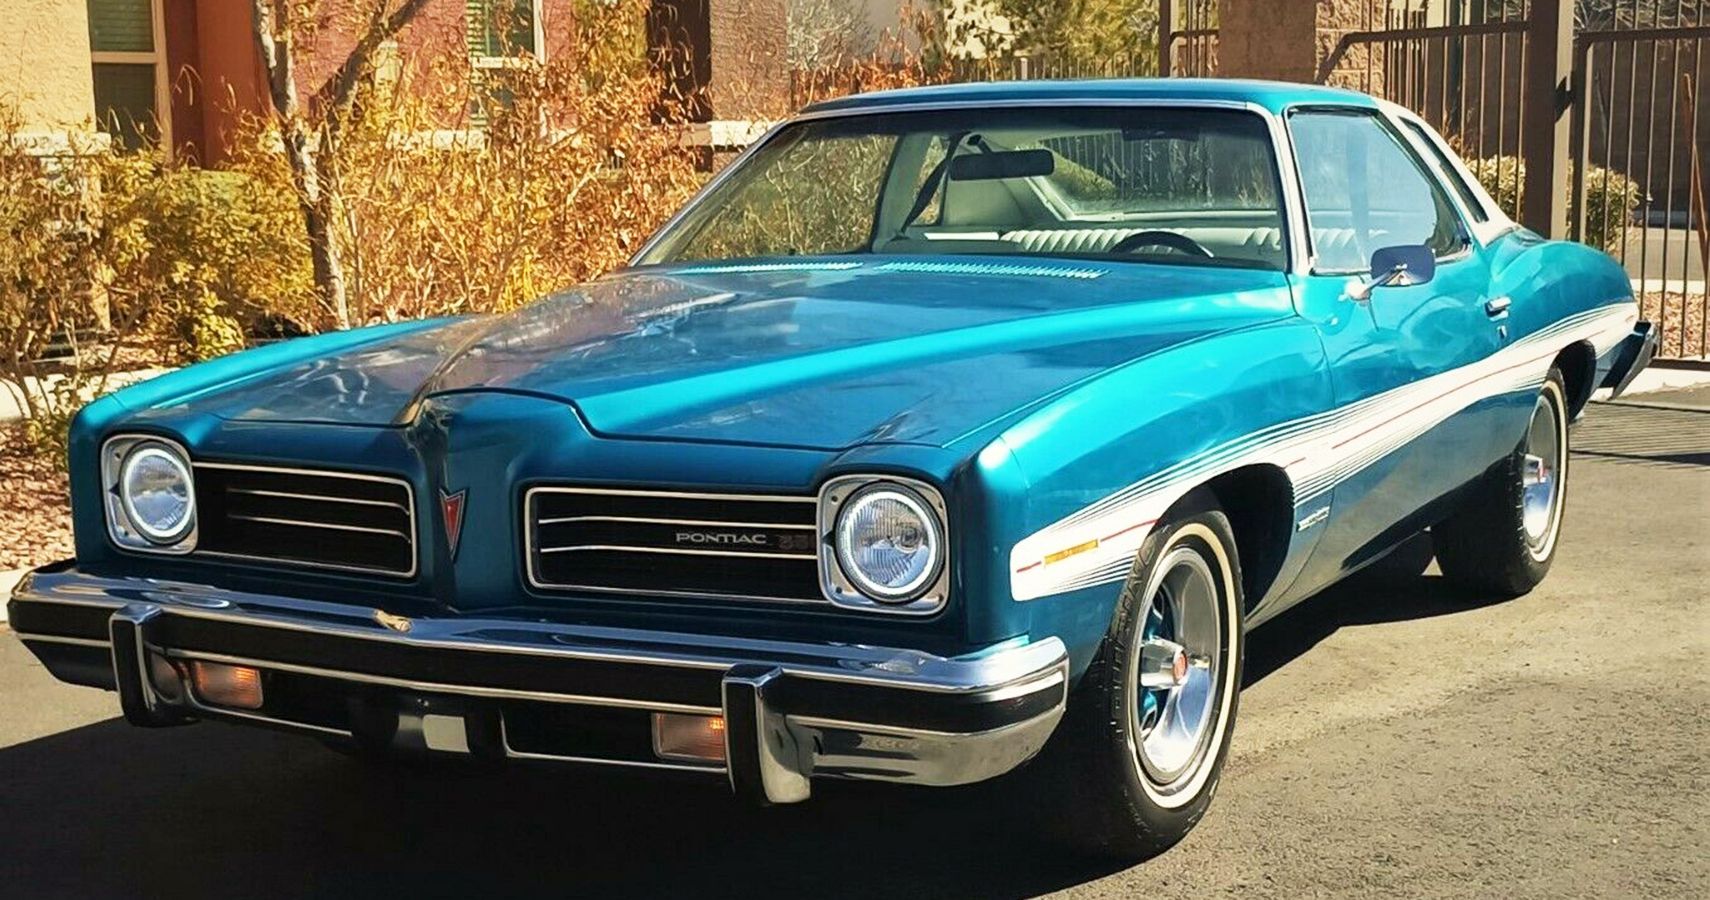 This One-Owner 1974 Pontiac Le Mans Sport Coupe Is A Rare Gem